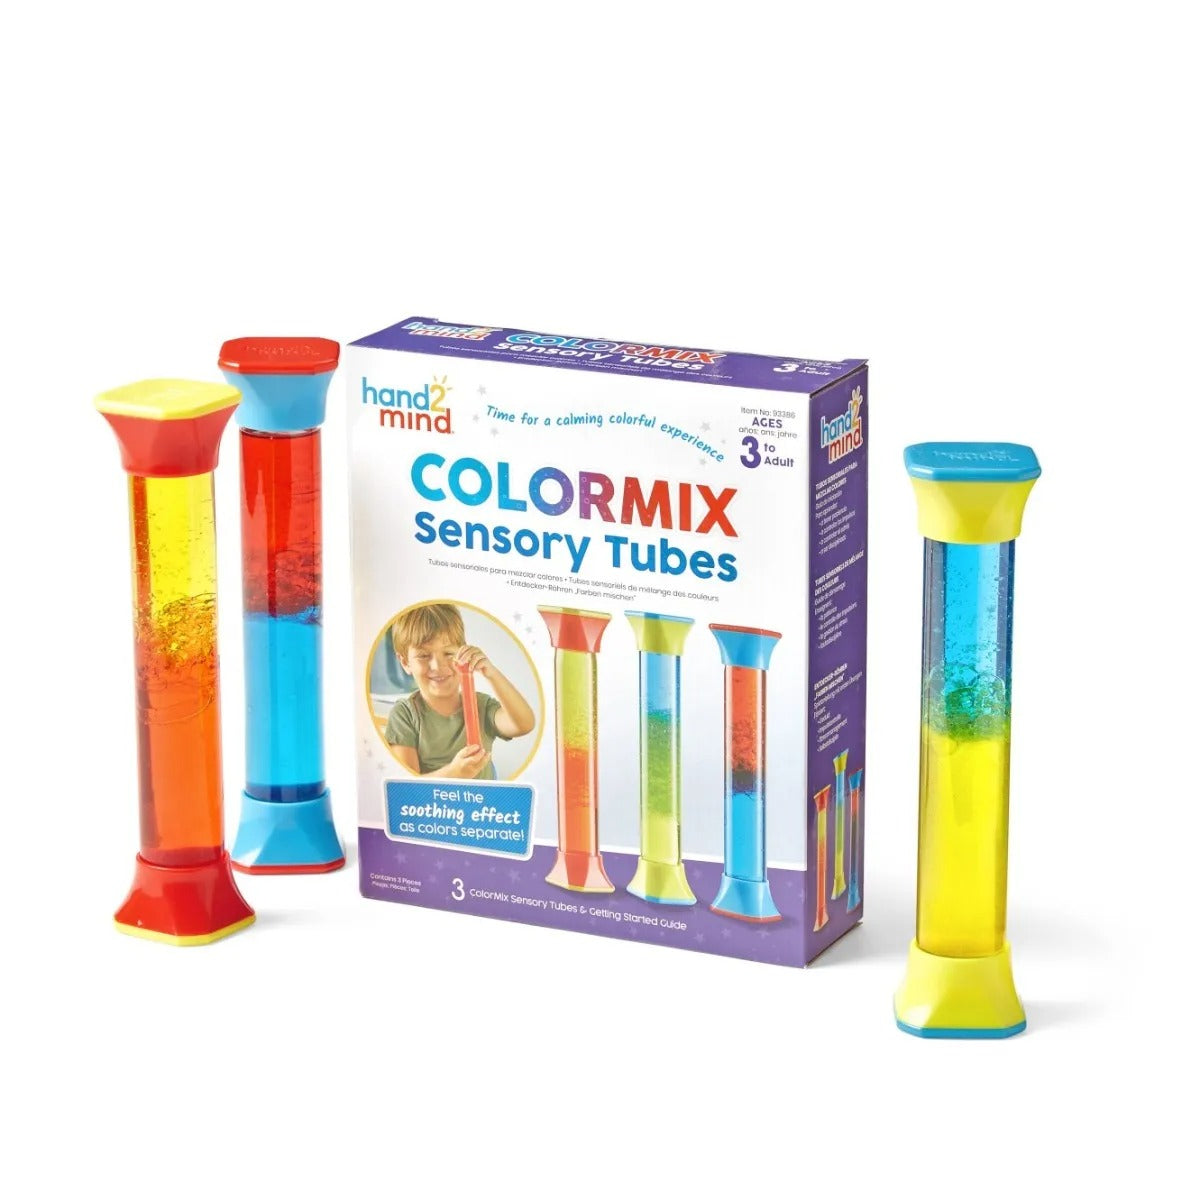 Colormix Sensory Tubes, Encourage sensory exploration and focus. Help children practise managing their emotions with this mesmerizing set of ColorMix Sensory Tubes! Each of the 3 Colormix Sensory Tubes offers a relaxing experience as you shake it to mix the colours and then watch as they slowly separate back to their original colours. These securely sealed, easy-to-grip bottles will help children become resilient learners who respond positively to any challenge! Colormix Sensory Tubes Jumbo tubes are easy t